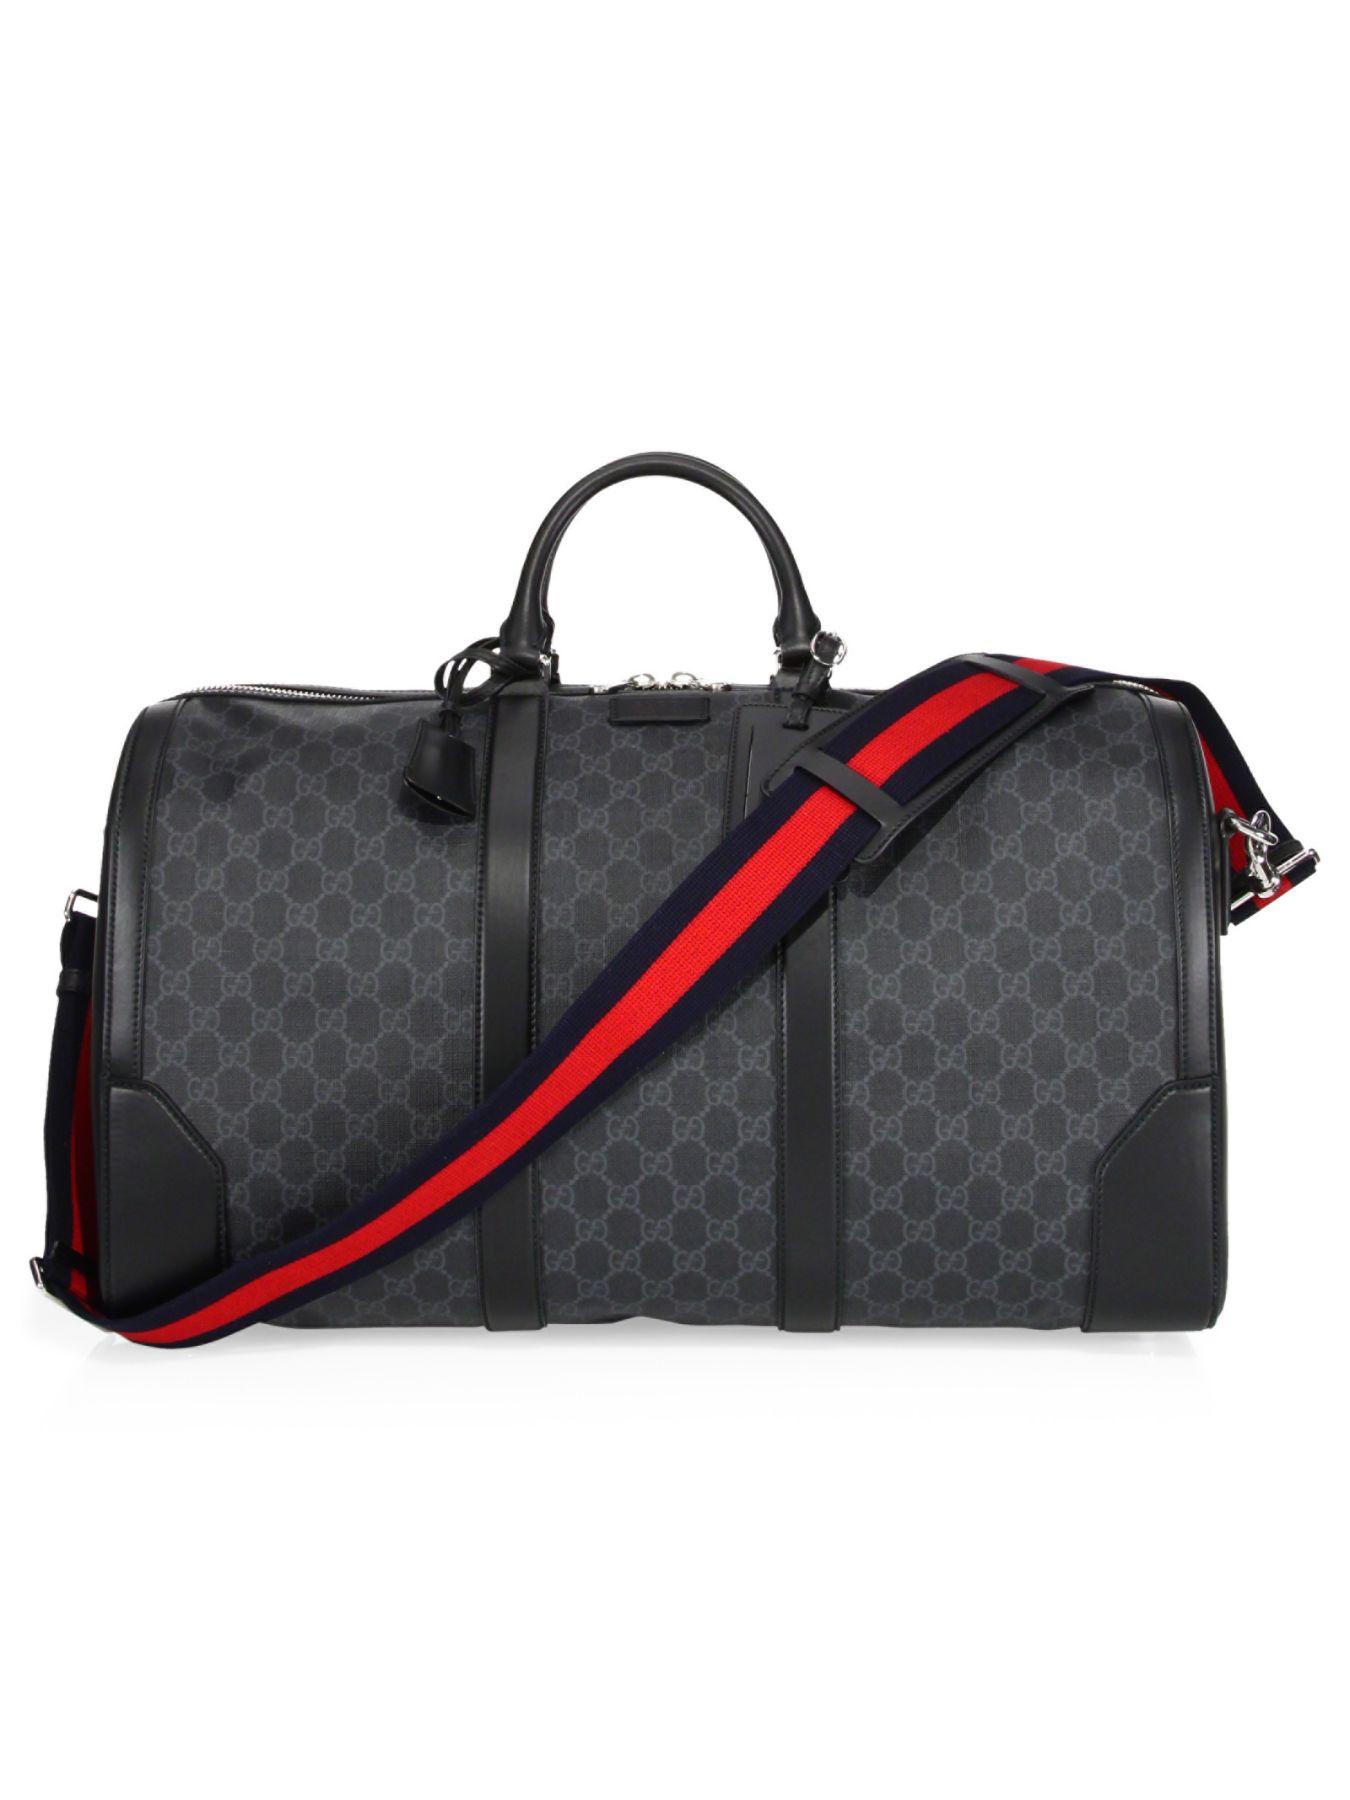 Gucci Canvas Large GG Duffle Bag in Black for Men - Save 5% - Lyst